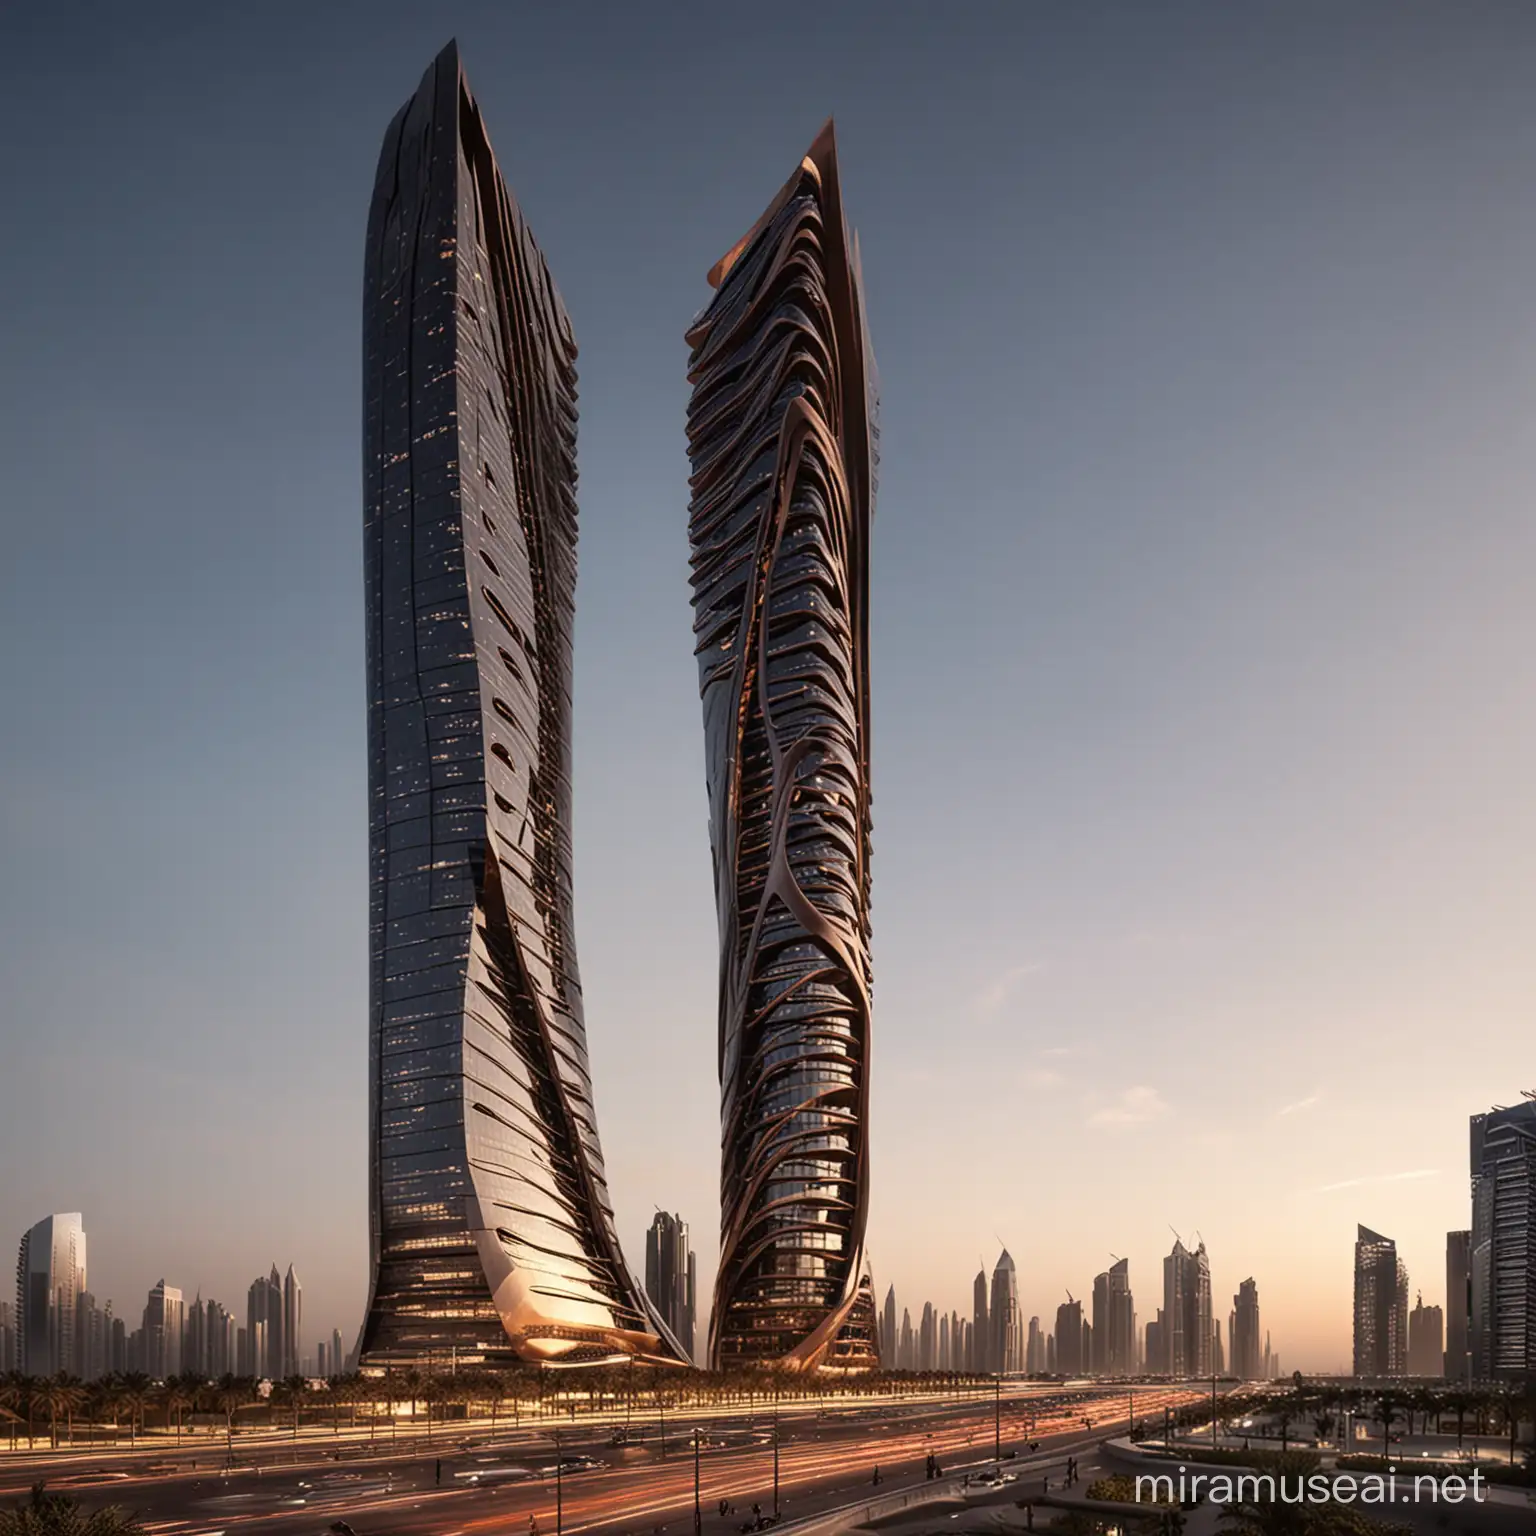 Luxurious Zaha Hadid Tower in Black and Copper Iconic Architecture in Dubai